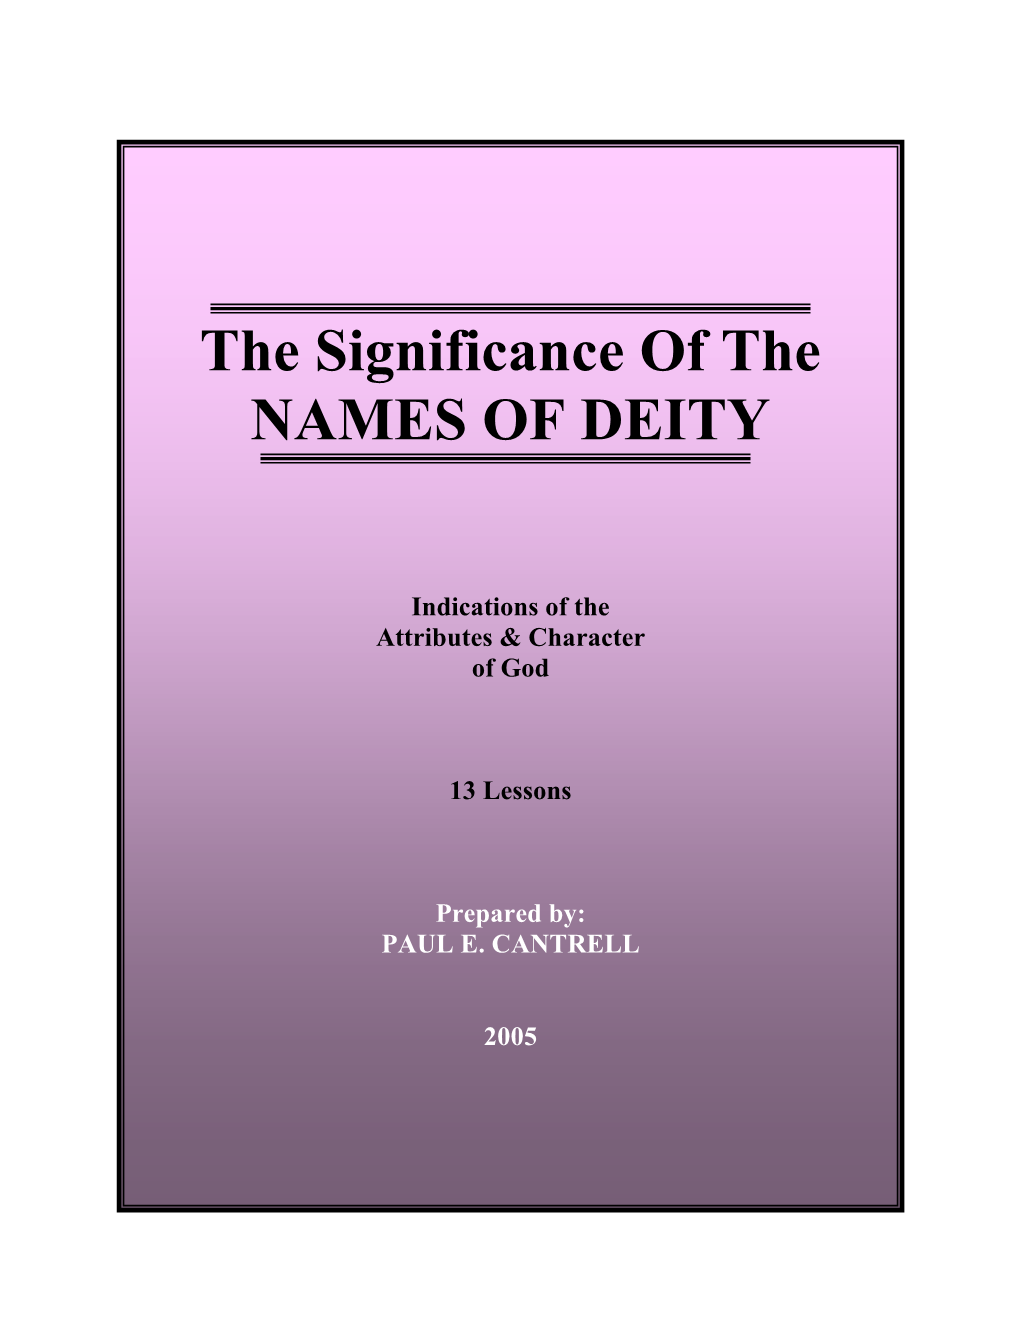 The Significance of the NAMES of DEITY